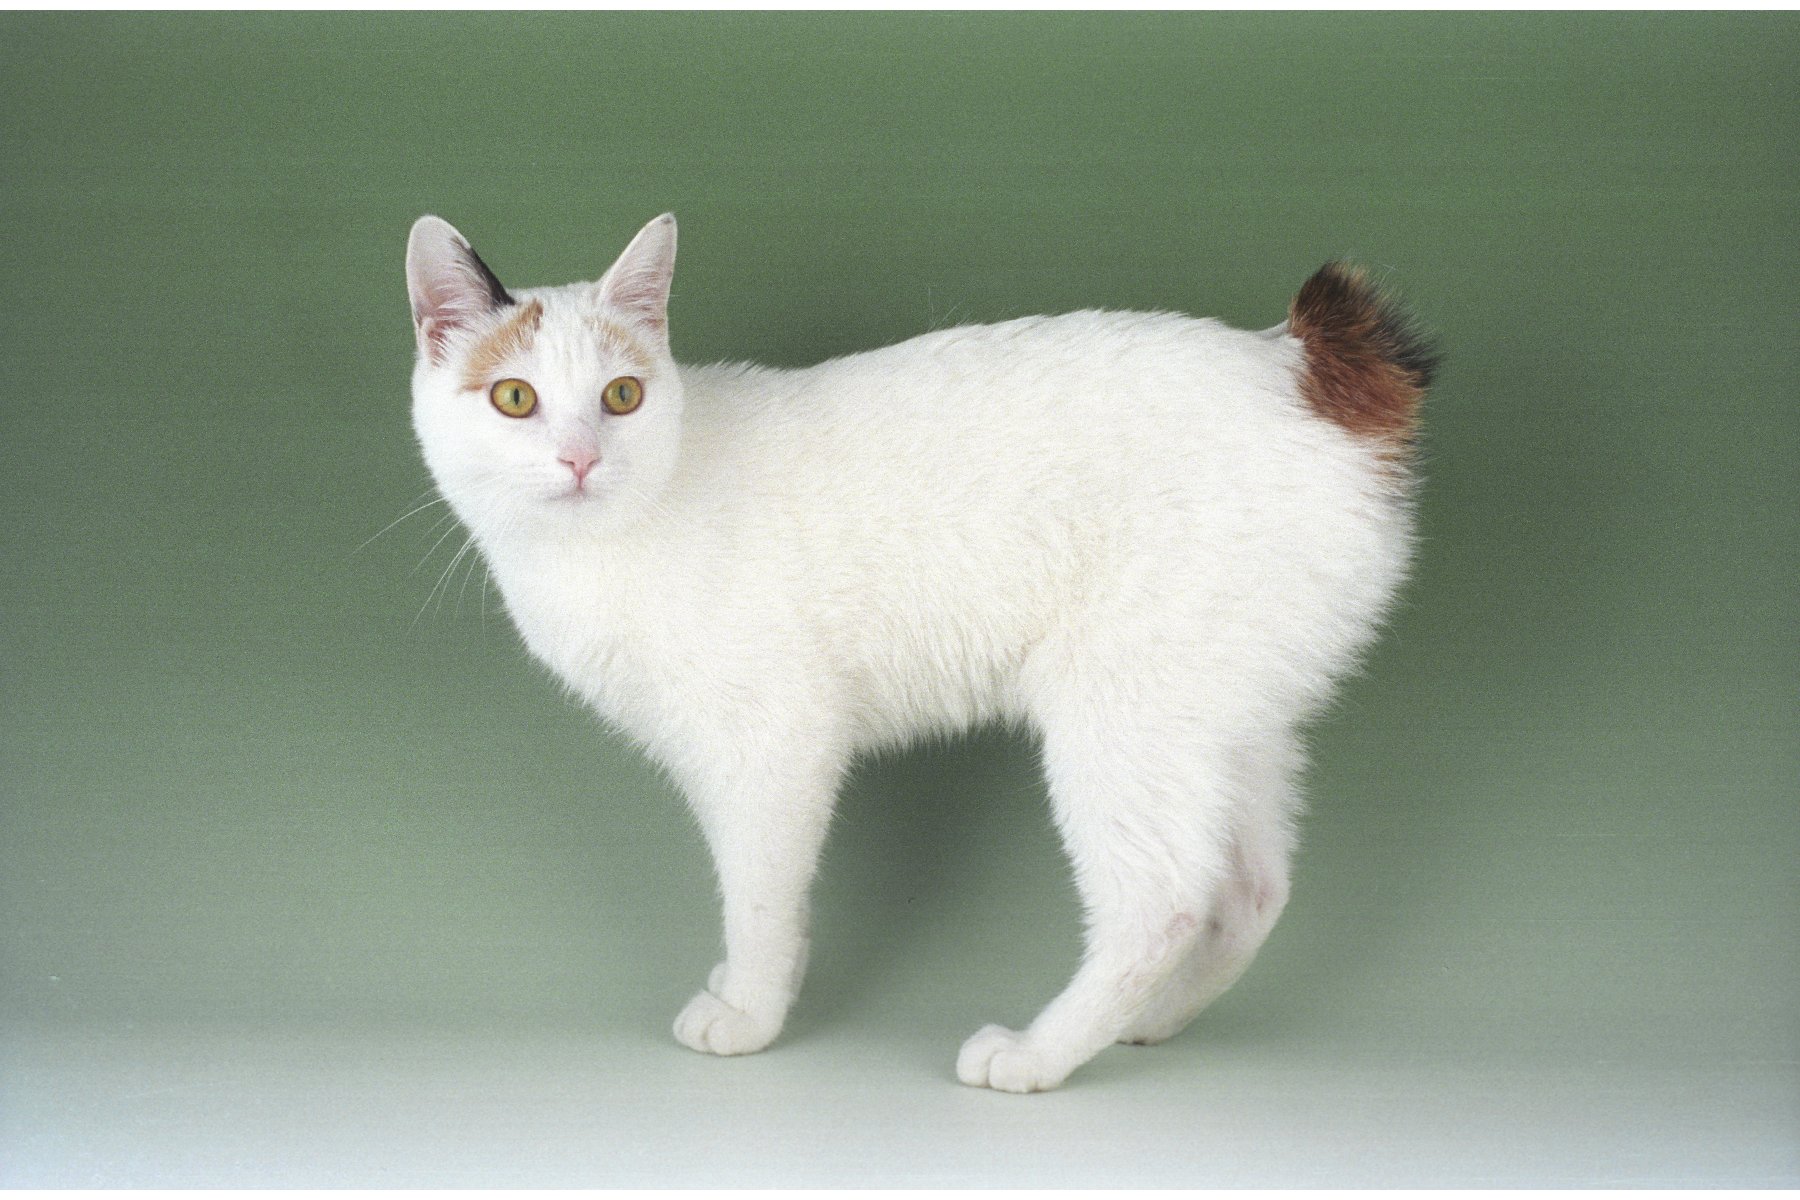 white cat with gray ears and tail